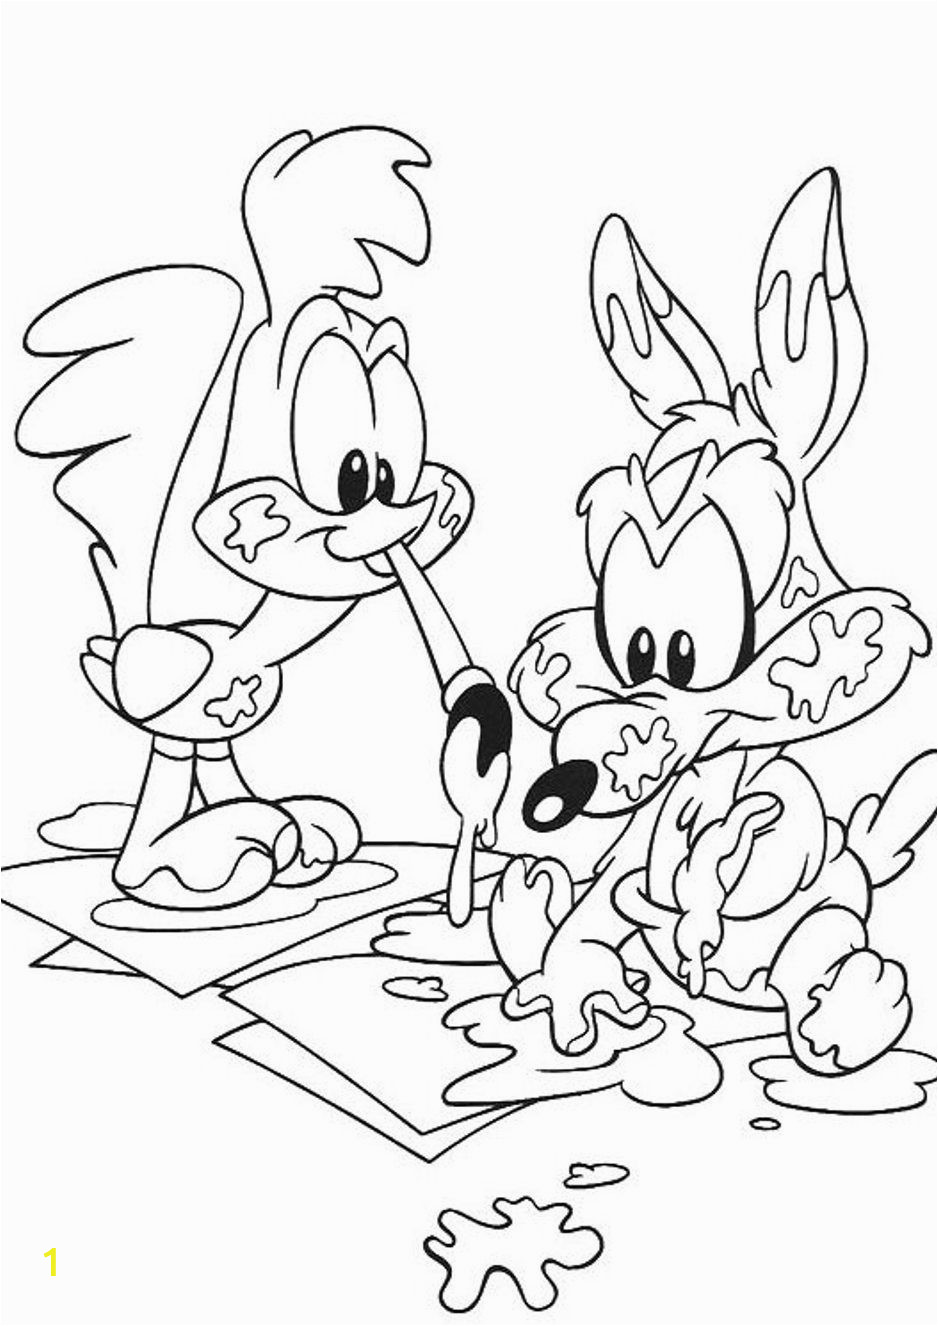 Free Printable Looney Tunes Coloring Pages Free Printable Looney Tunes Coloring Pages Coloring Home